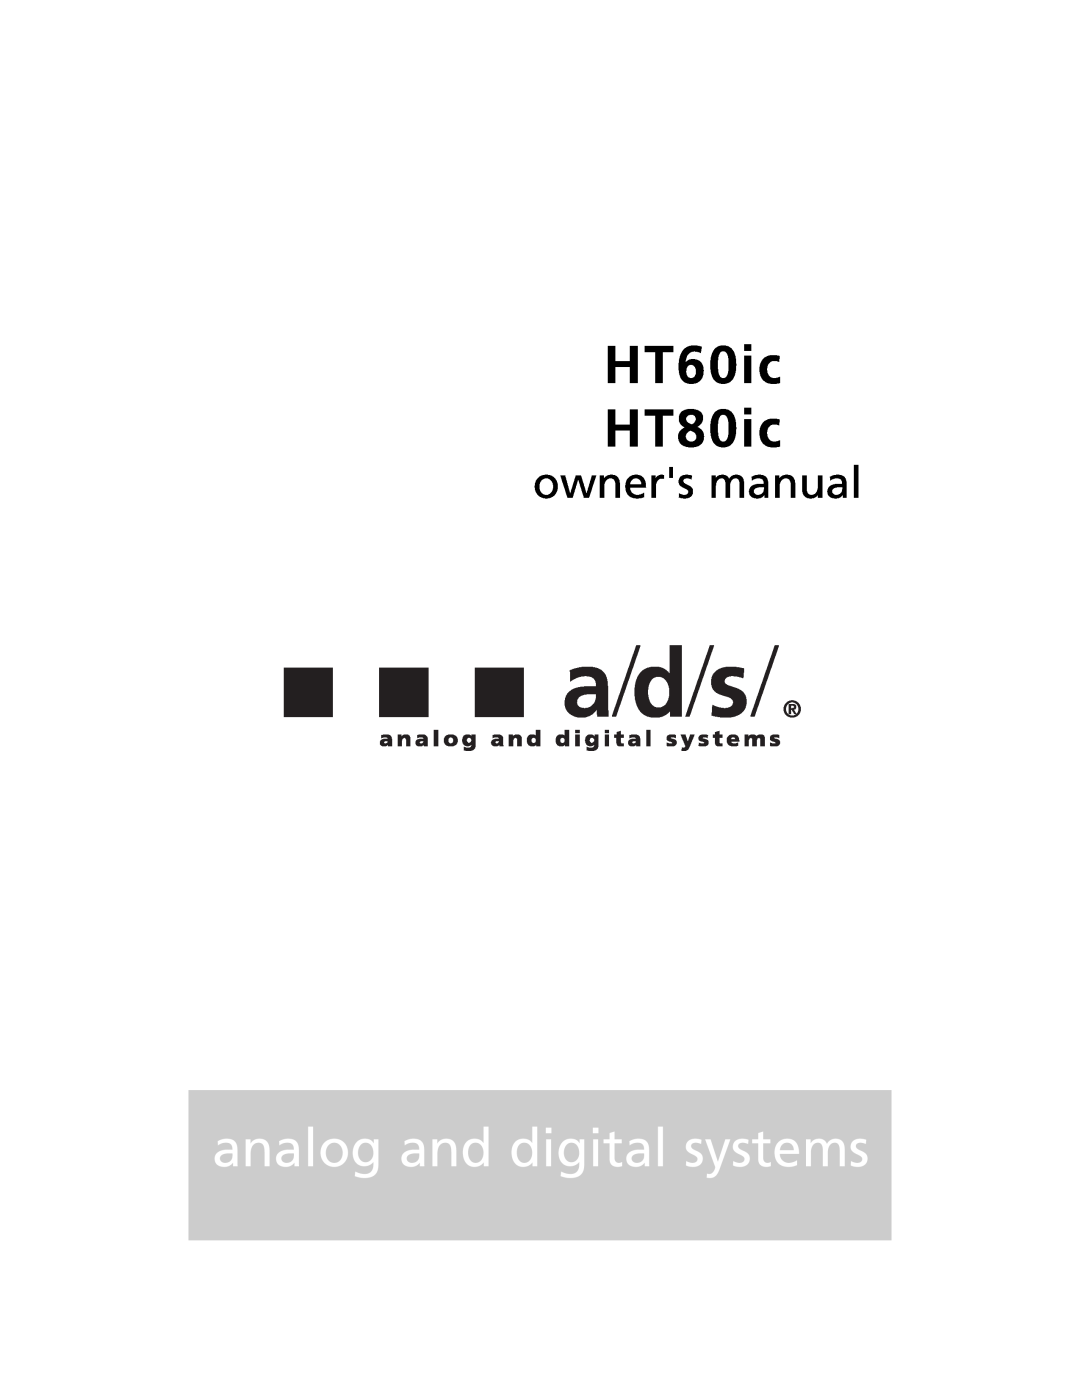 ADS Technologies HT60IC, HT80IC owner manual HT60ic HT80ic, analog and digital systems 